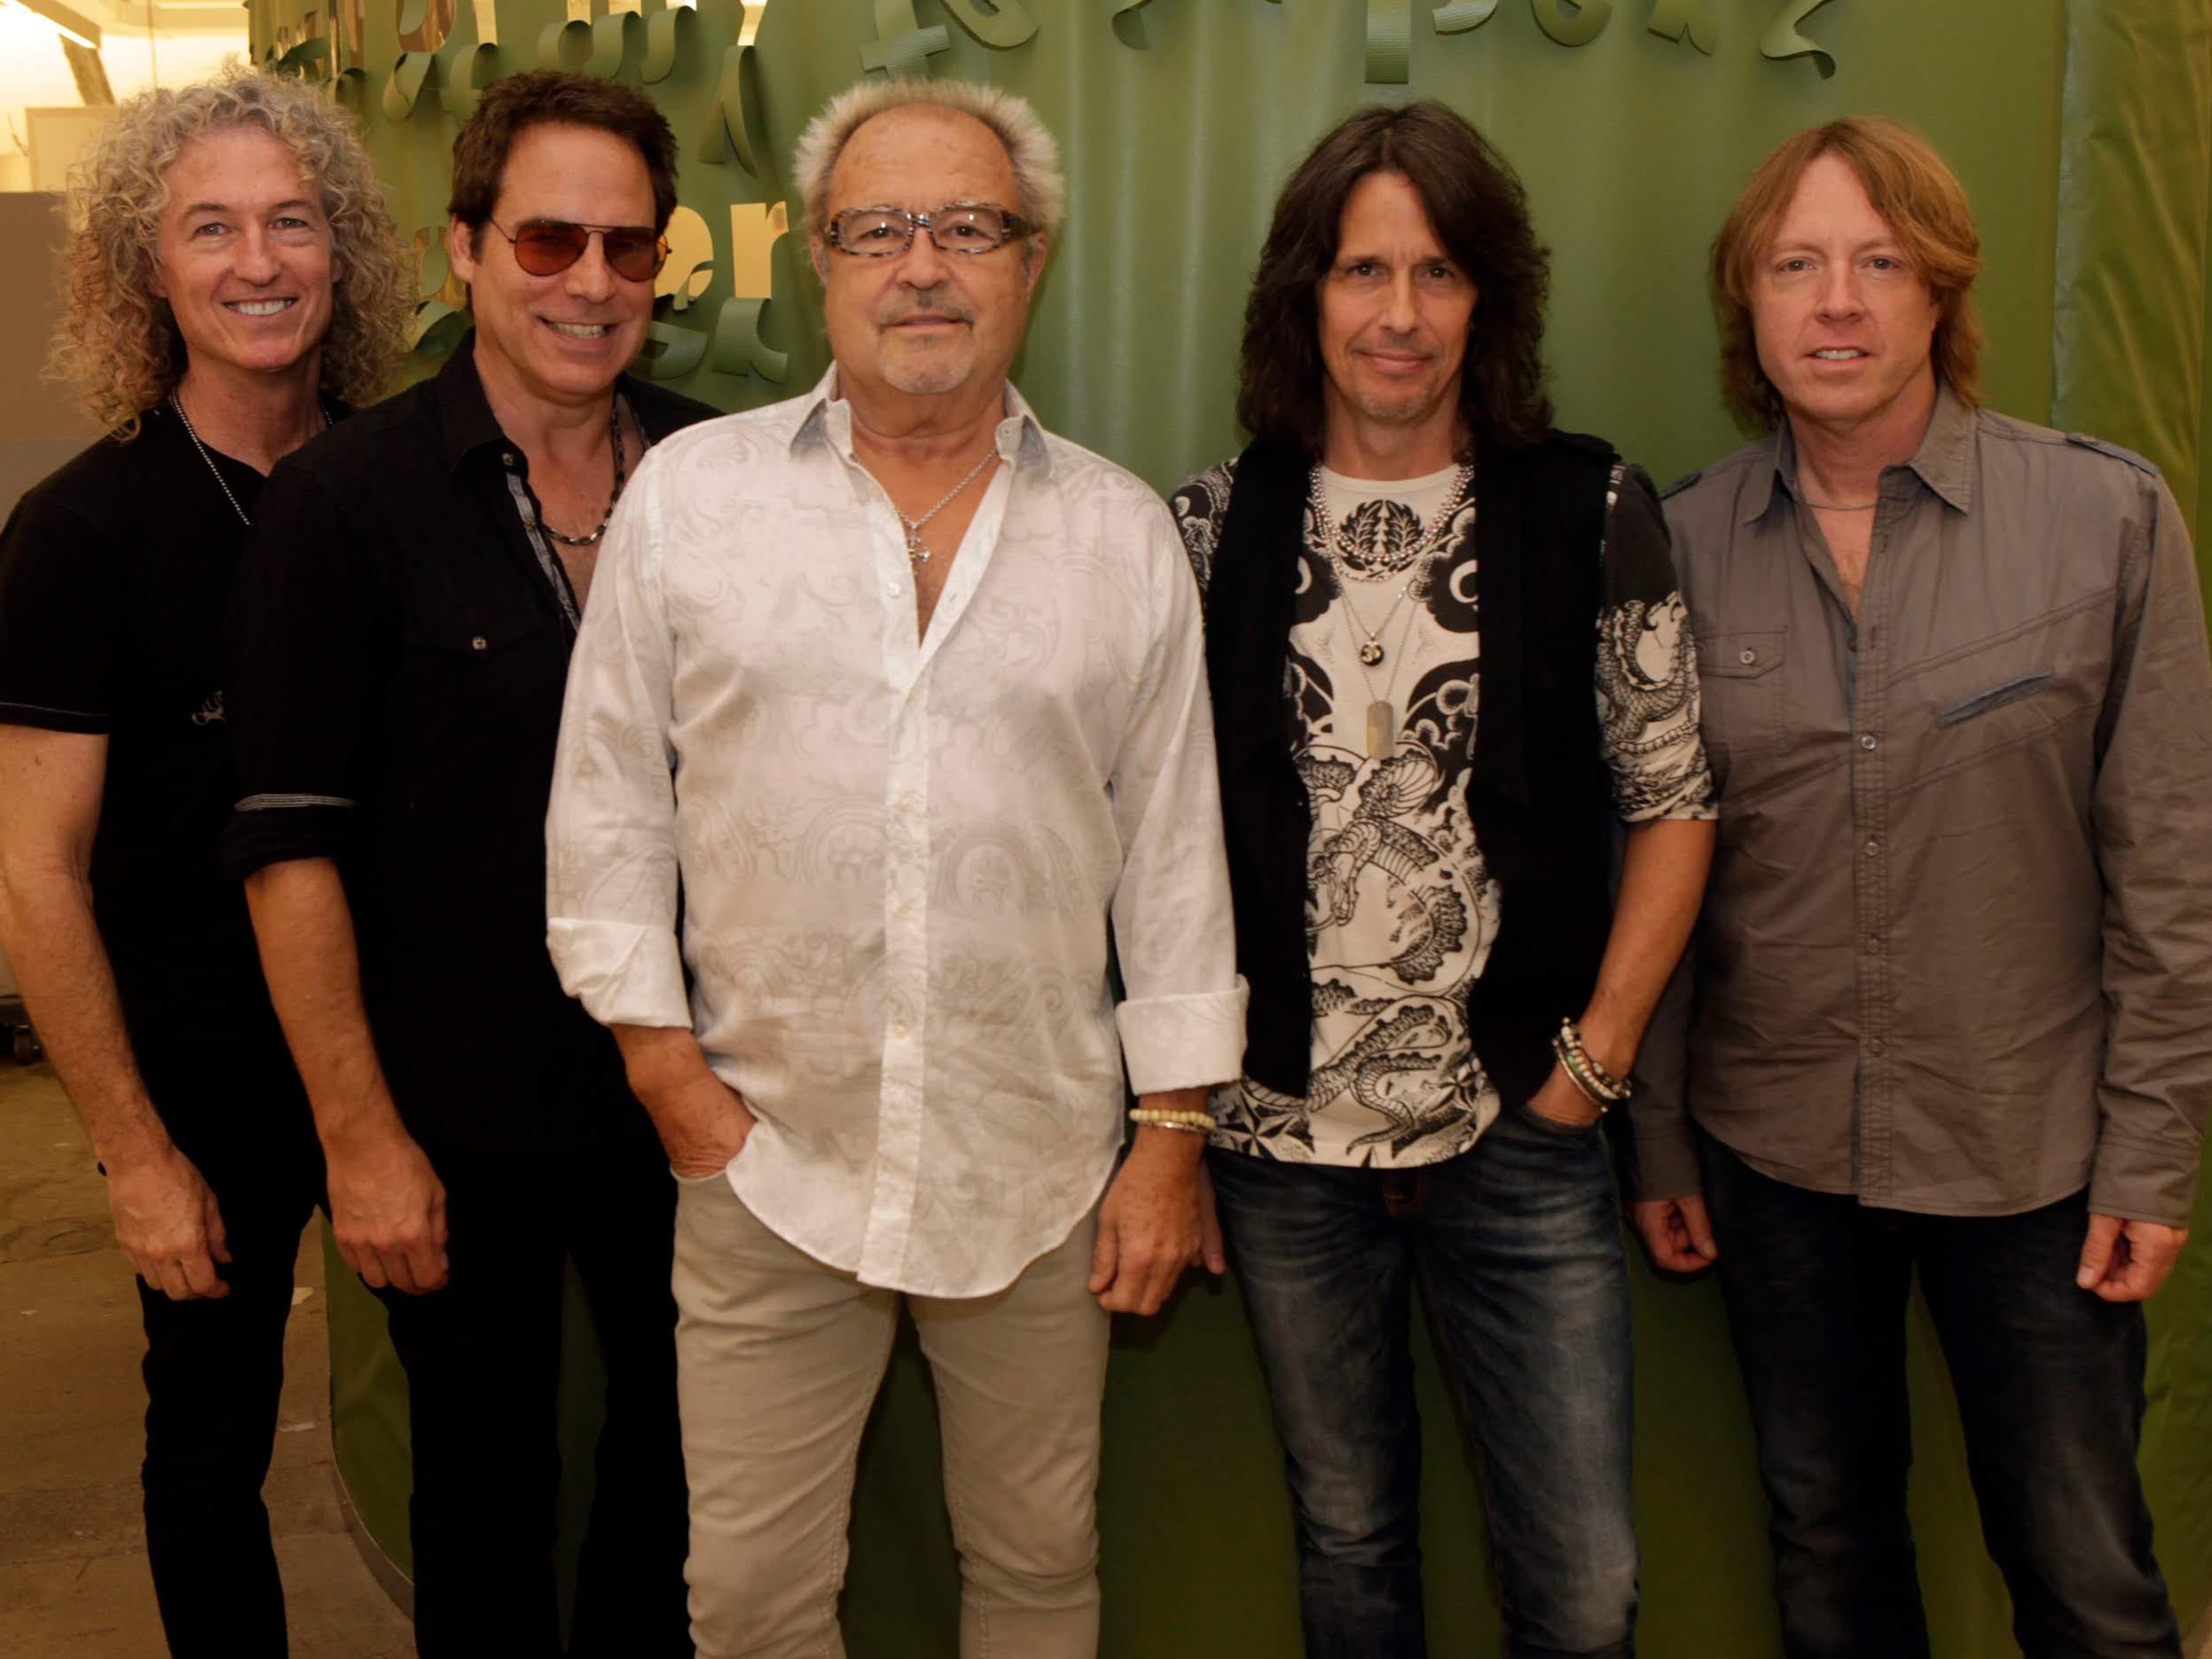 Foreigner will headline 2019 Indy 500 Carb Day concert